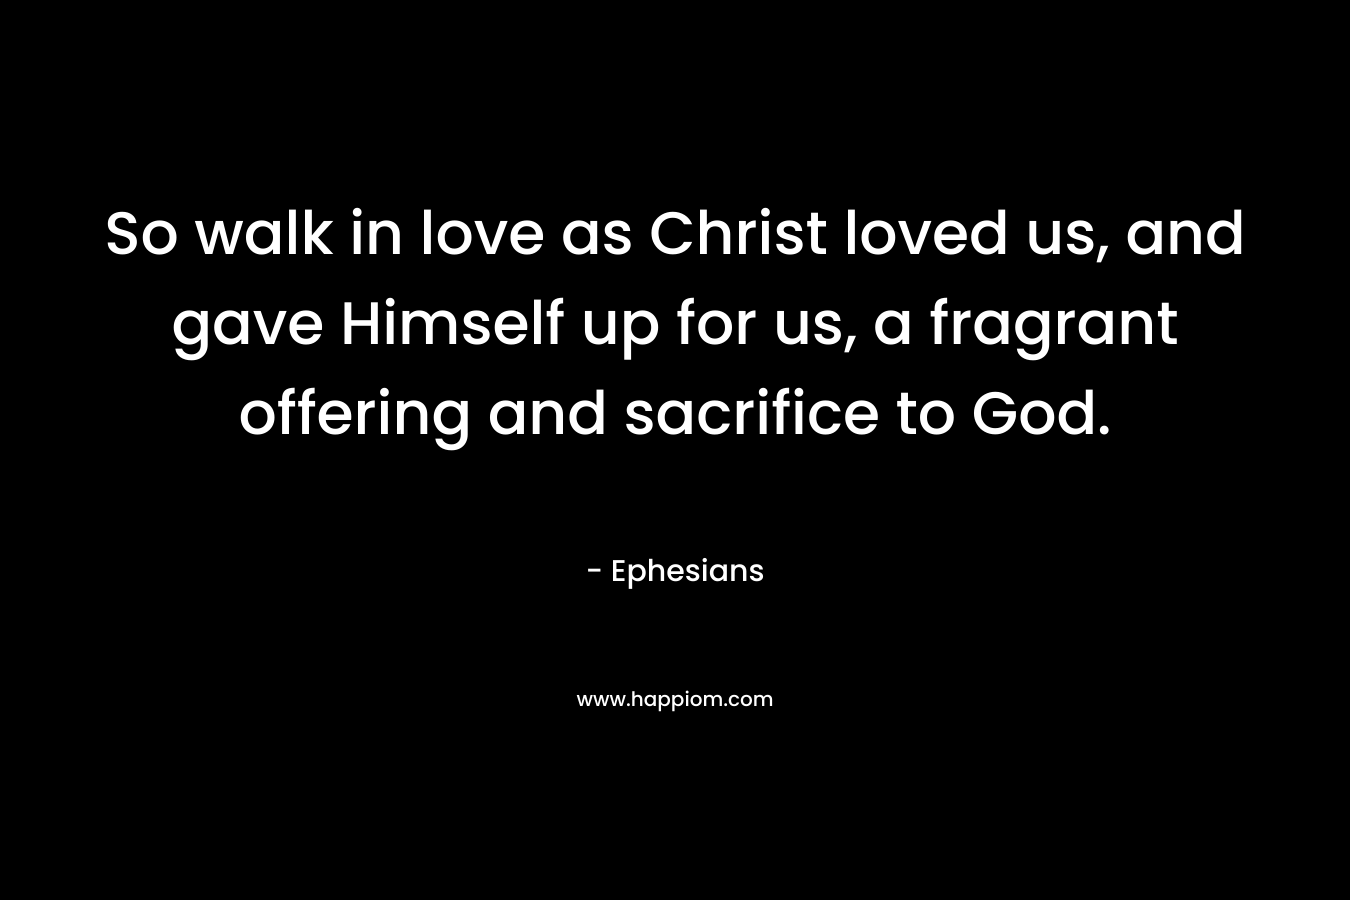 So walk in love as Christ loved us, and gave Himself up for us, a fragrant offering and sacrifice to God. – Ephesians